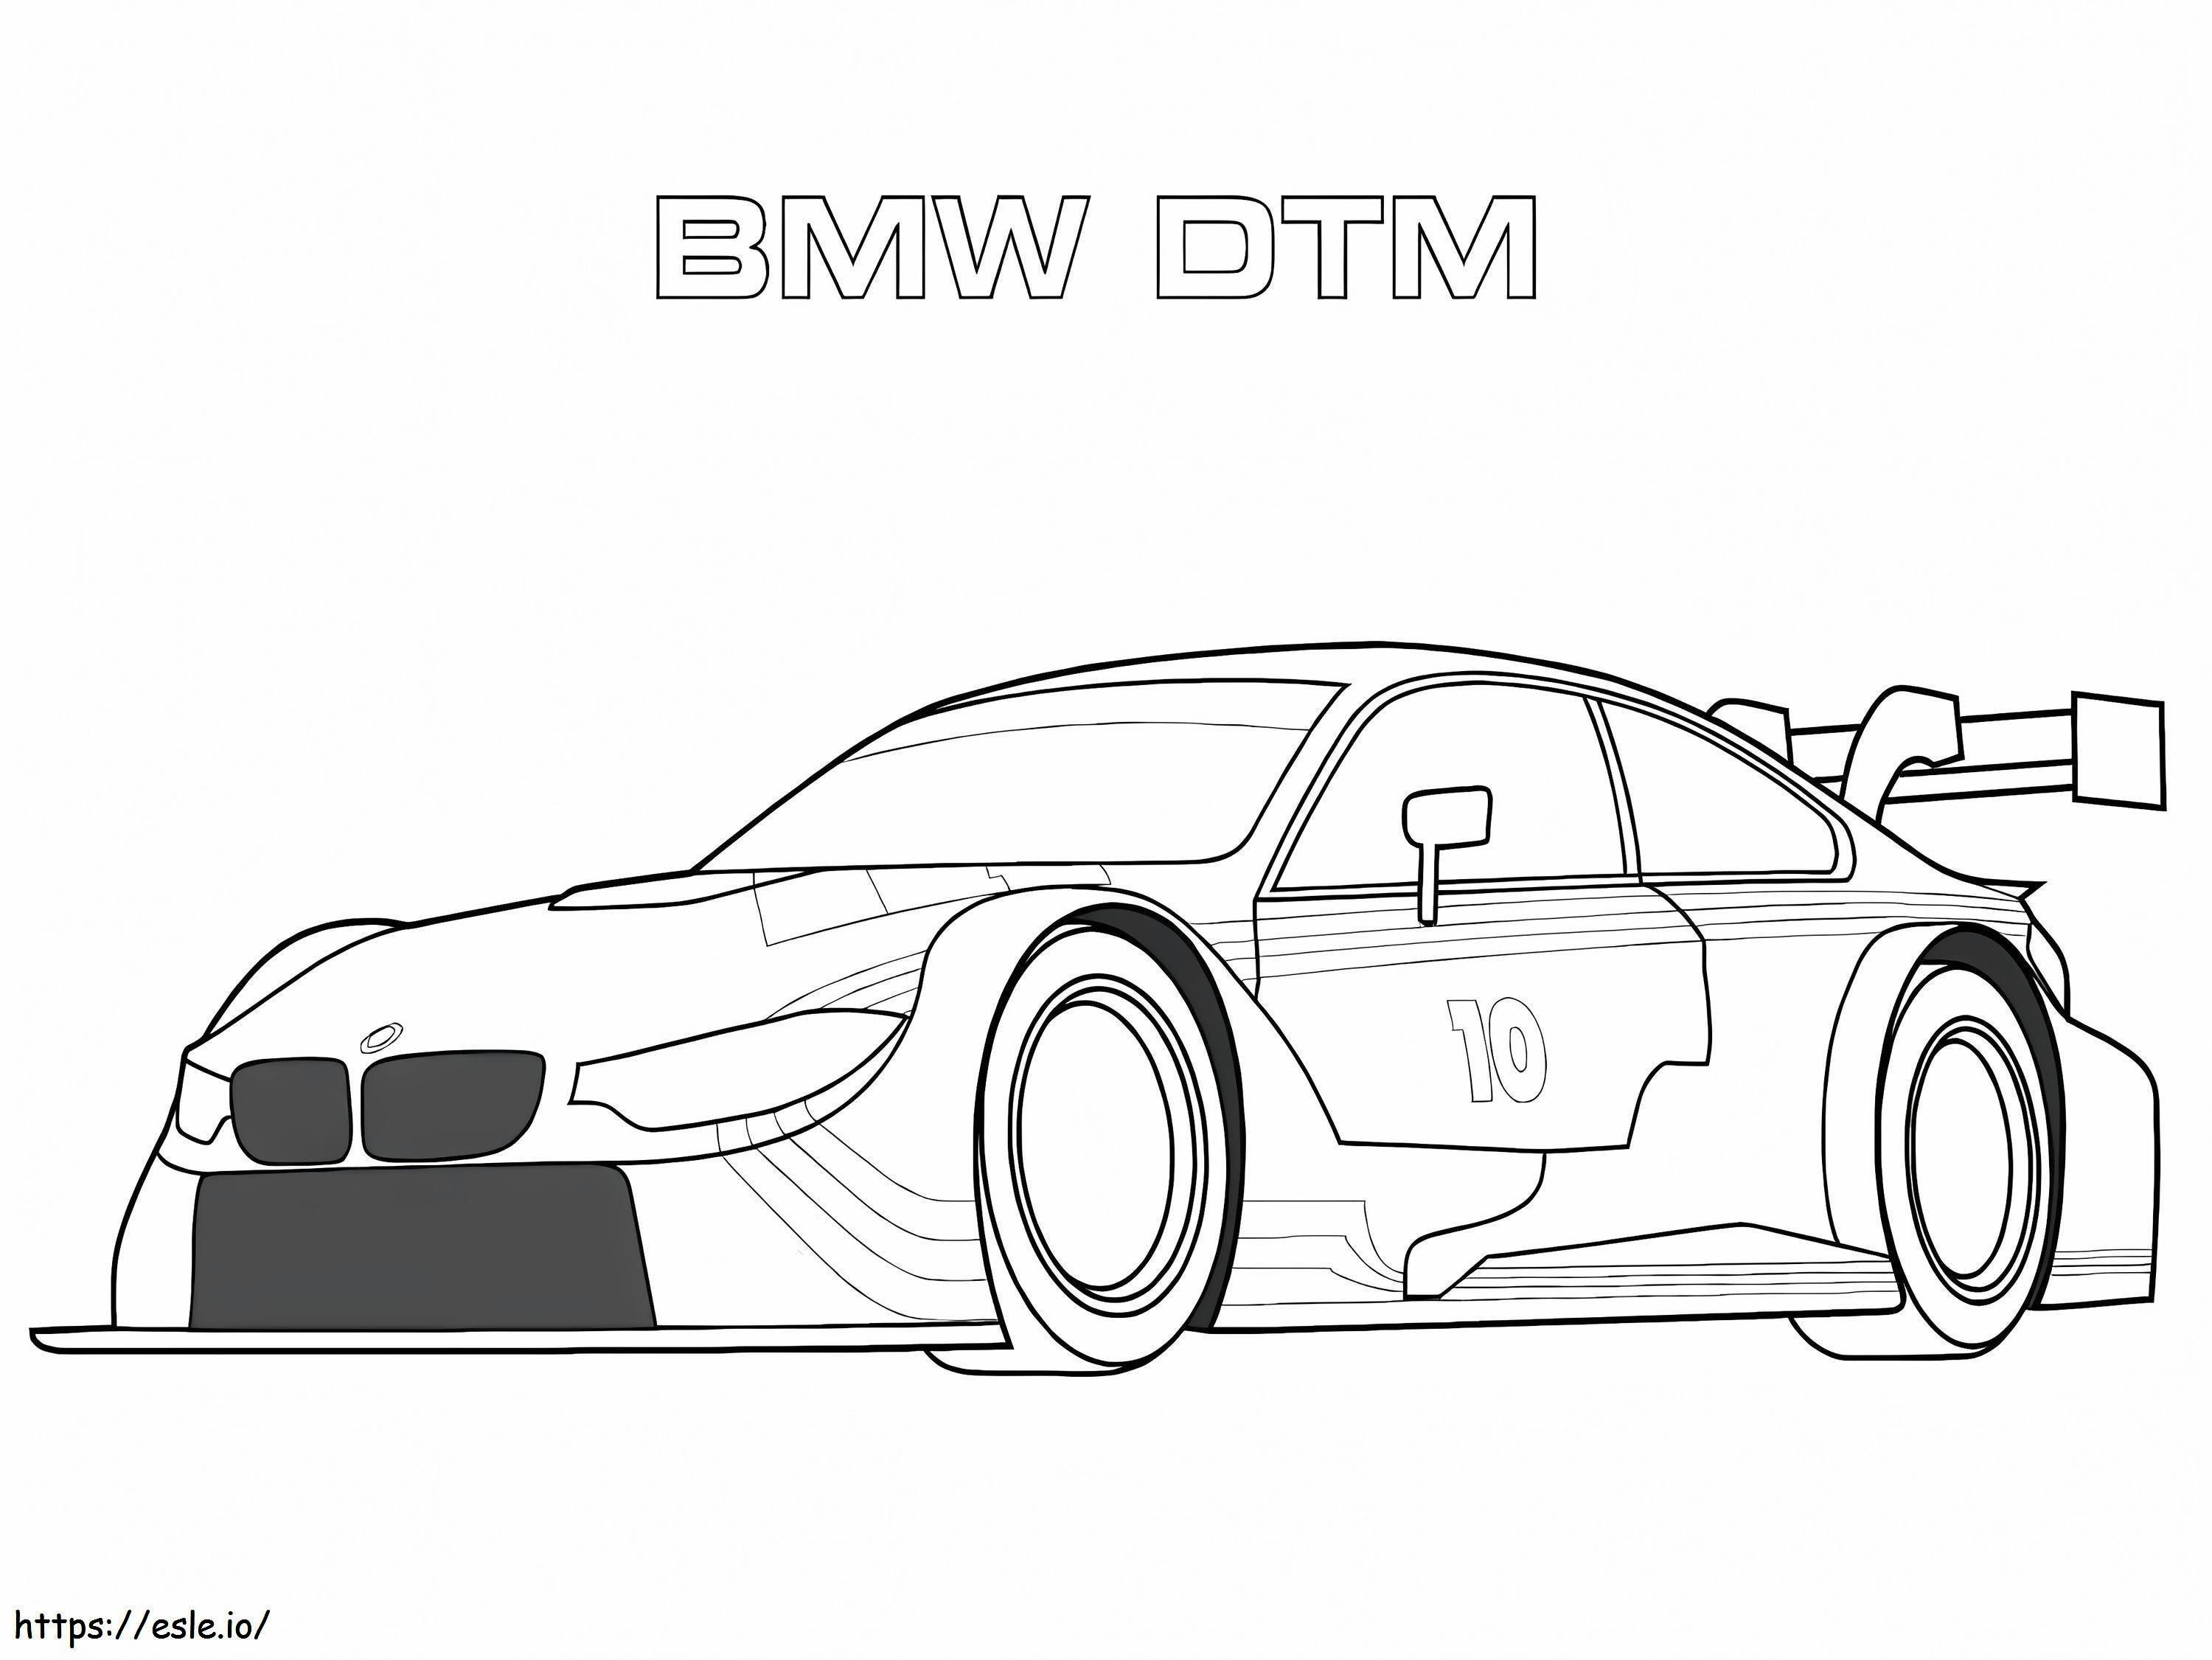 Bmw Dtm Racing Car coloring page